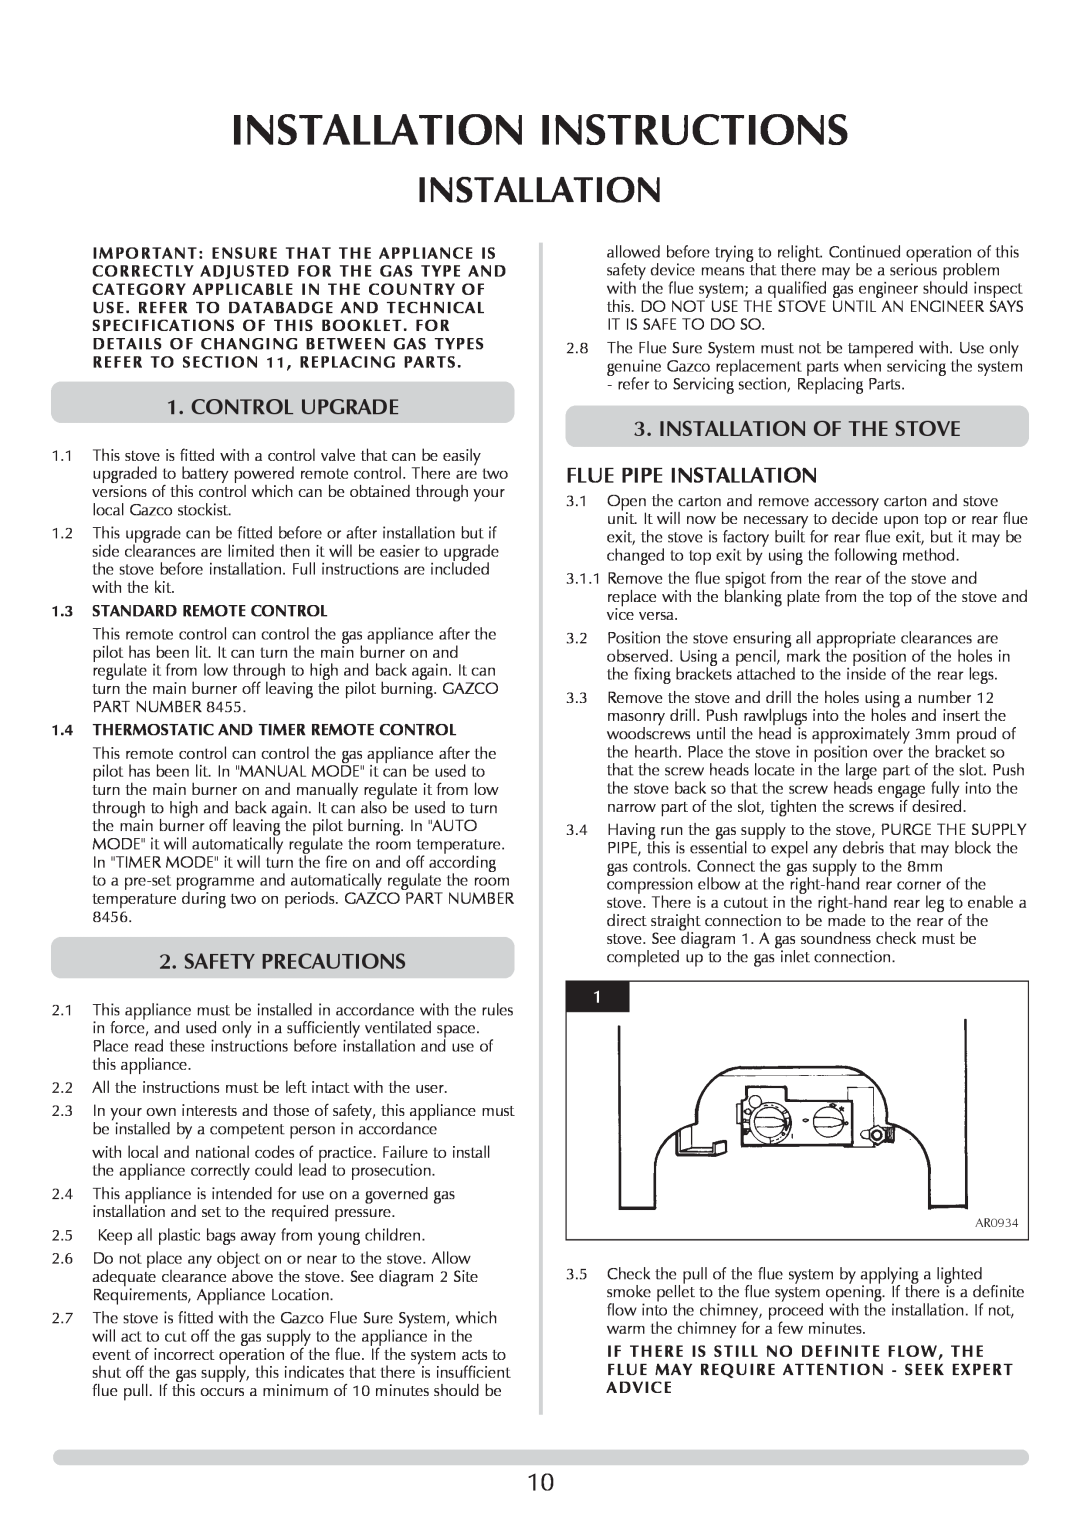 Stovax Stove Range manual Installation Instructions, Control Upgrade, Safety Precautions, Installation Of The Stove 